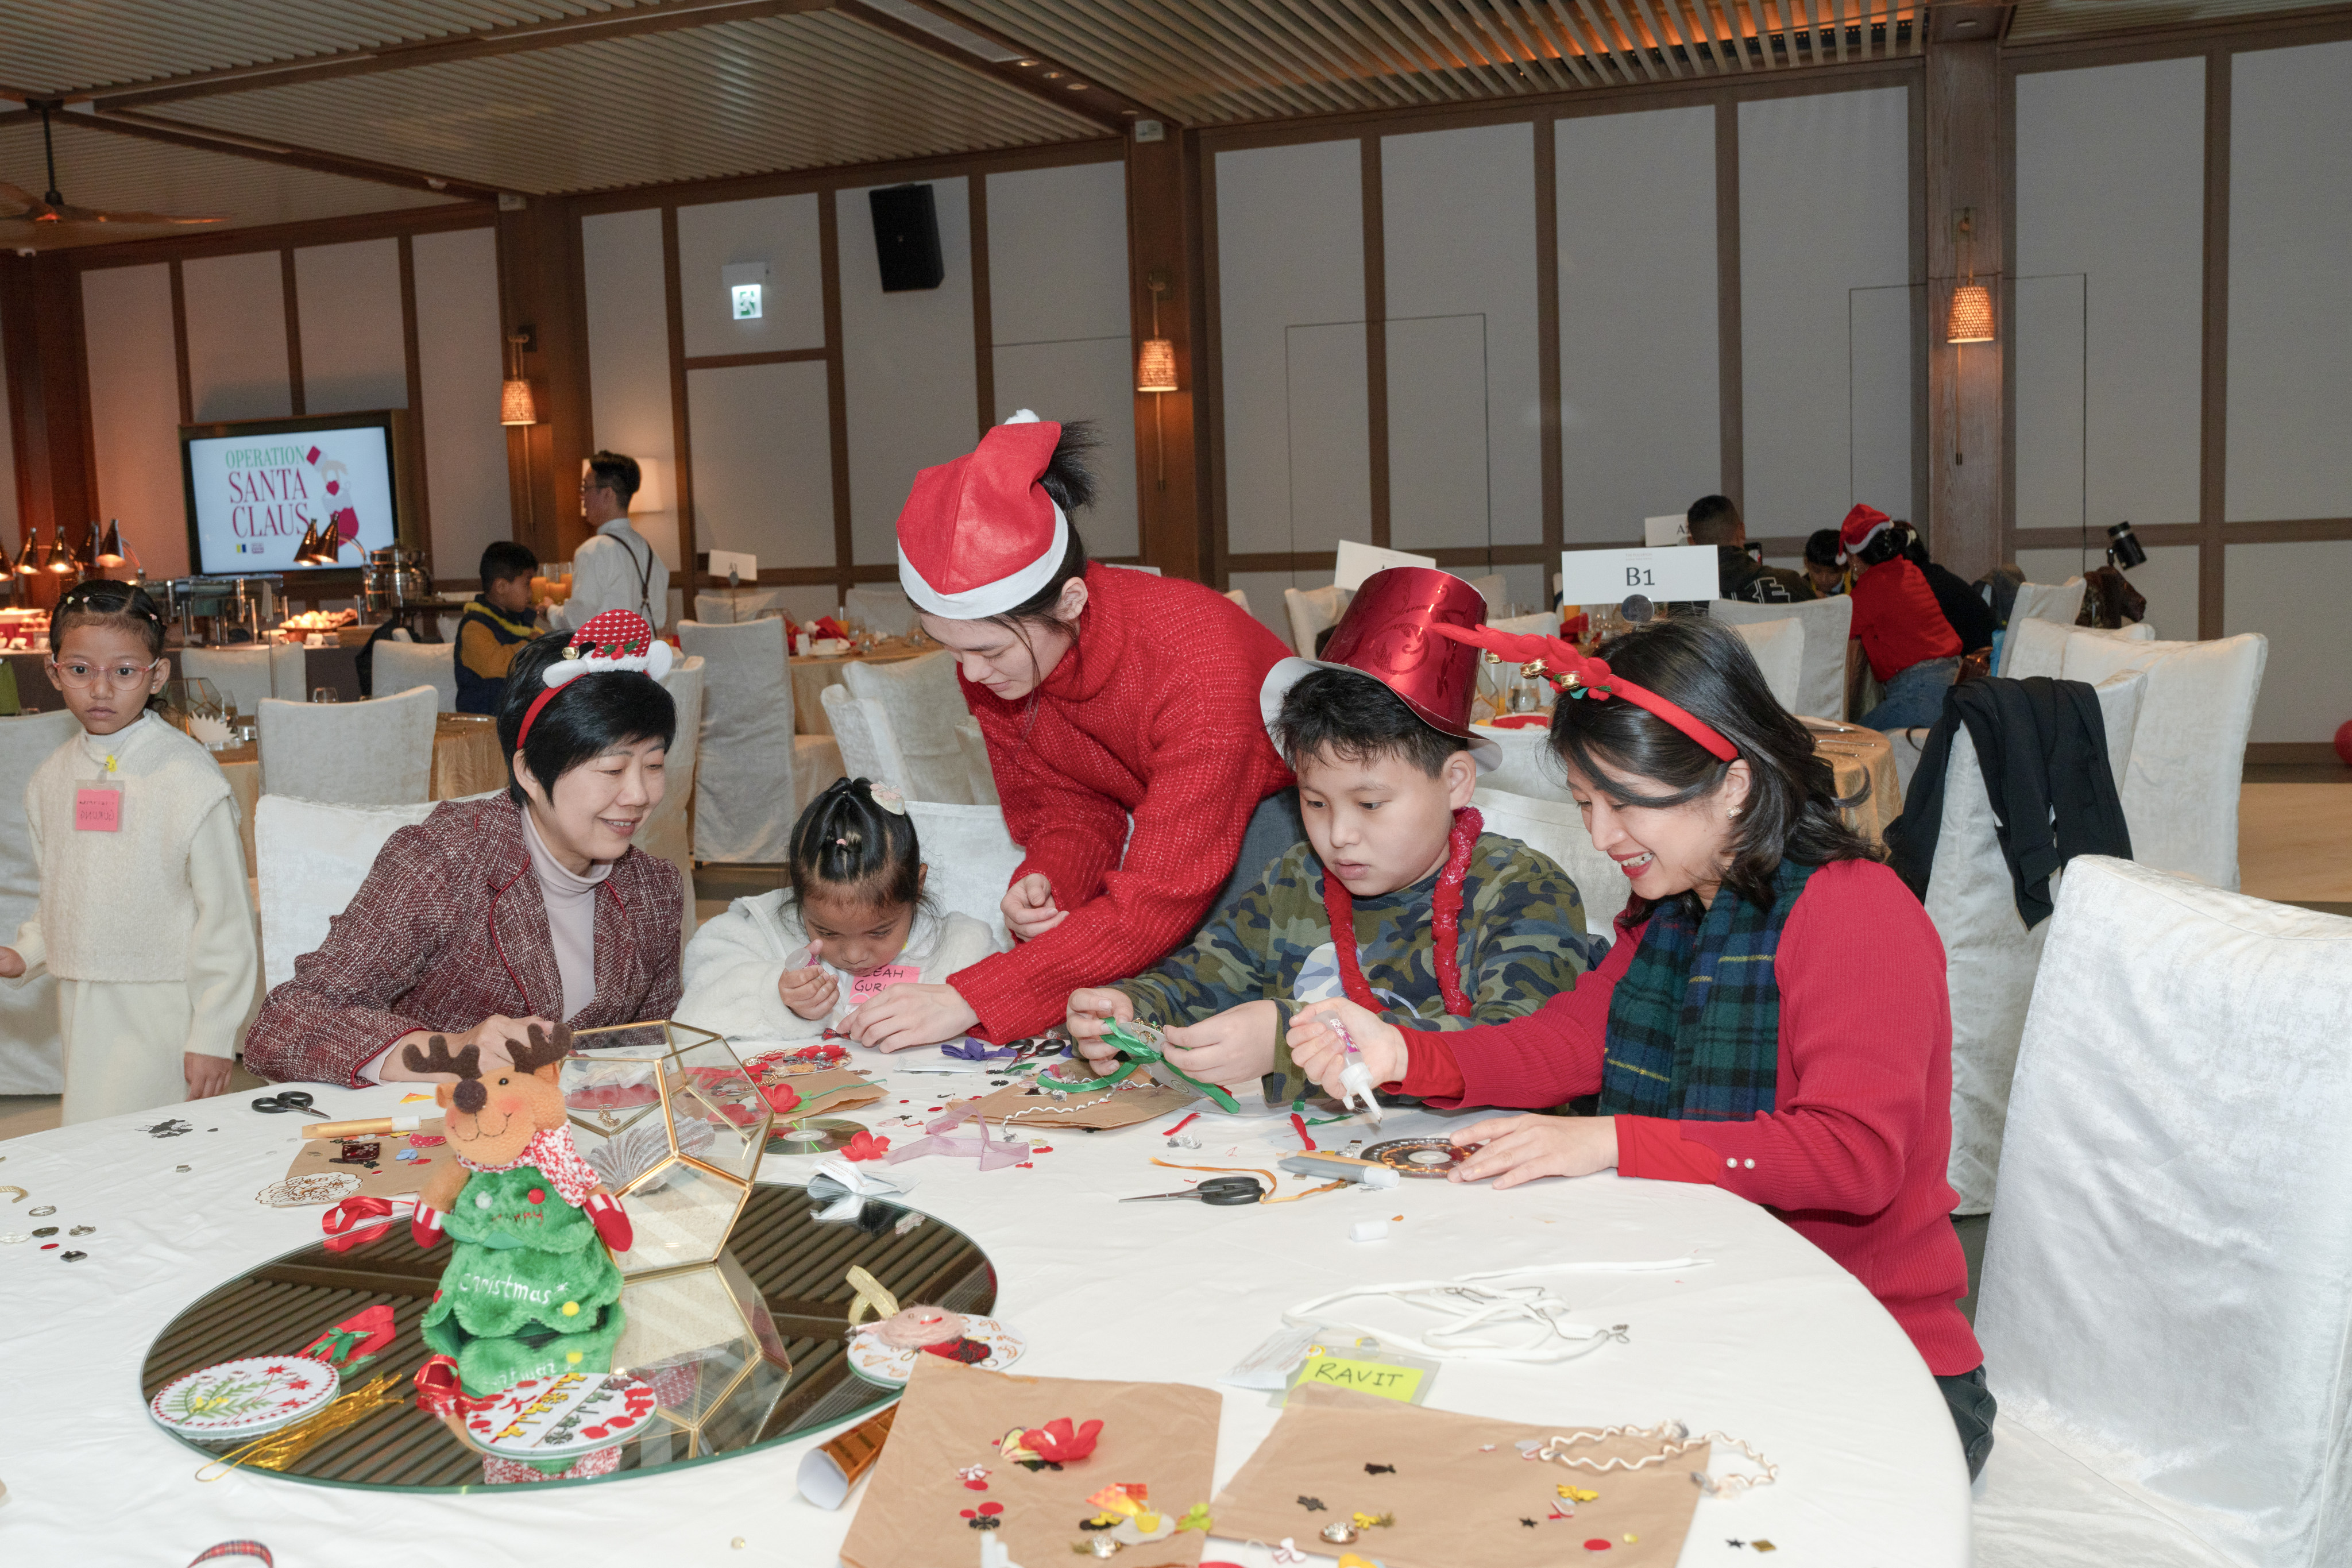 Attendees take part in workshops to create their own Christmas decorations. Photo:  Eboham Liga